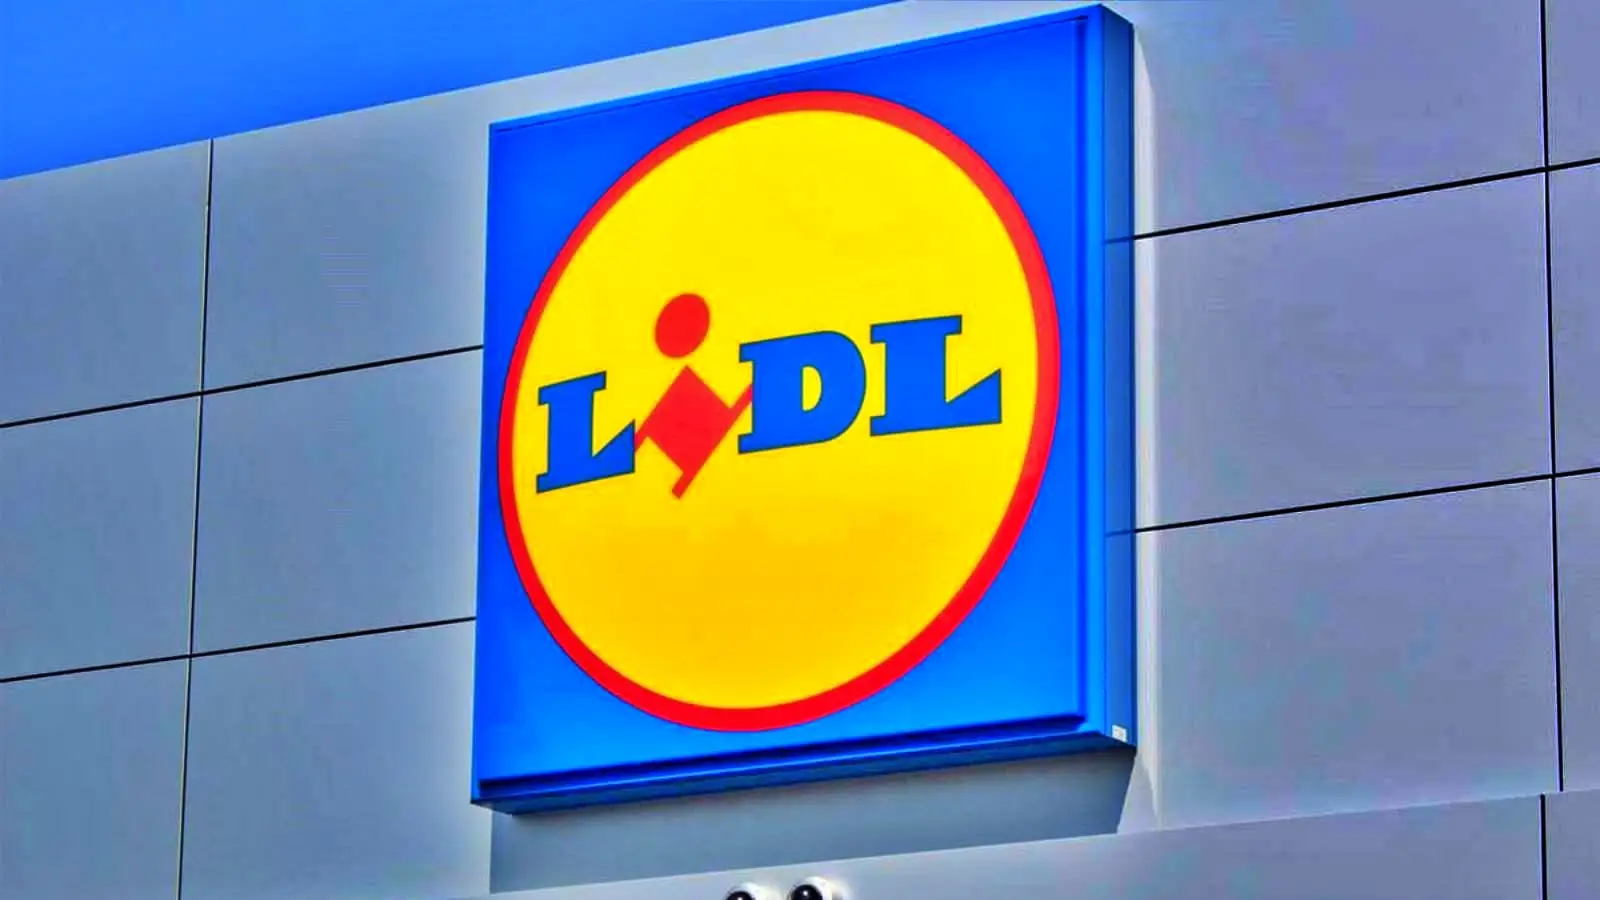 LIDL Romania Reveals FREE to Romanian Customers Right Now